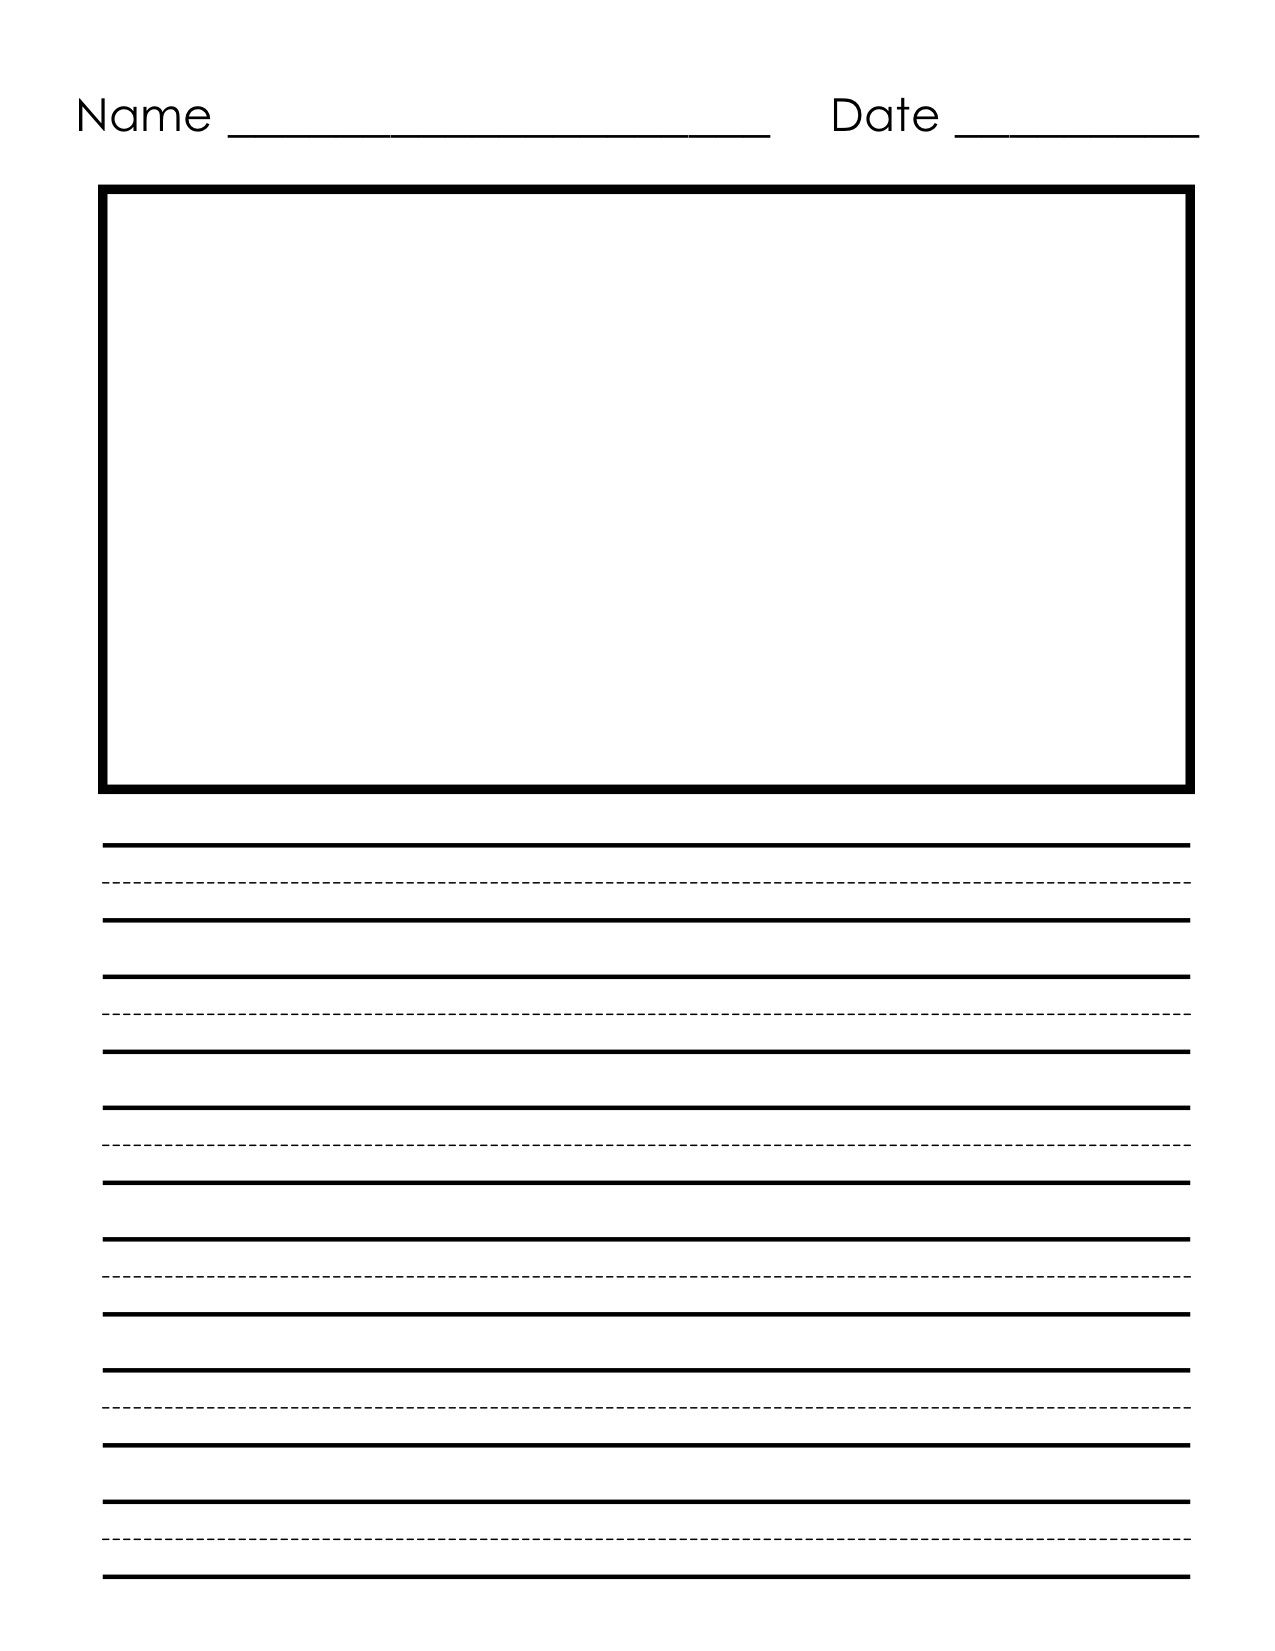 Pinheather Riddle On Home School Resources | Preschool Writing - Free Printable Kindergarten Lined Paper Template